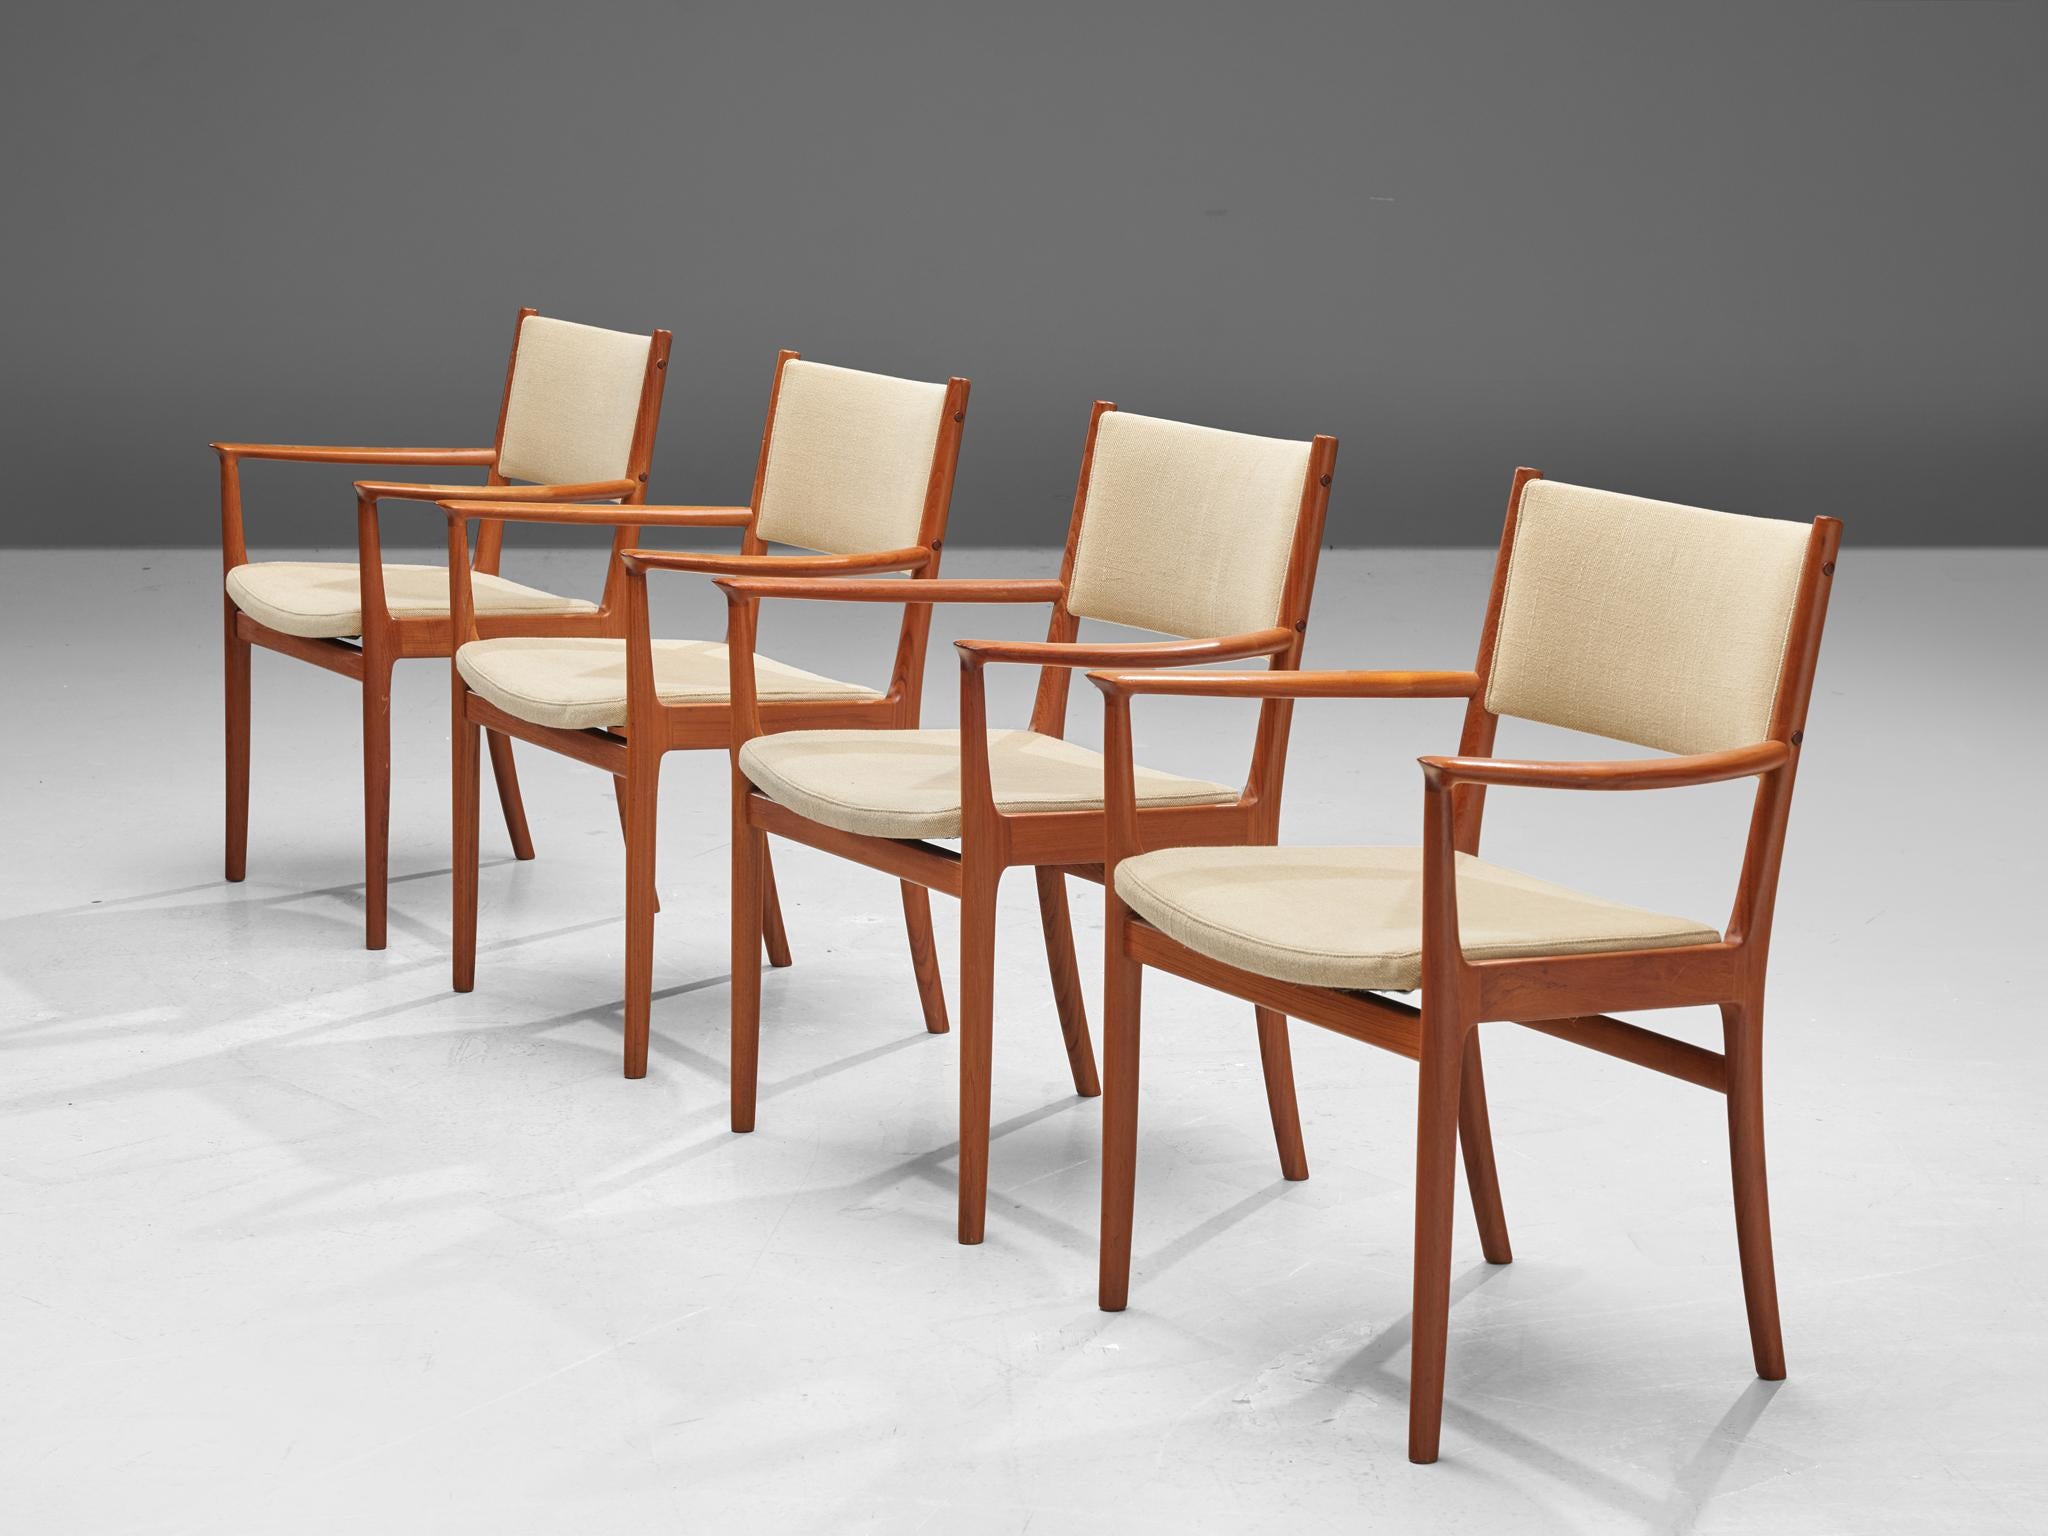 Kai Lyngfeldt Larsen, set of four dining chairs, teak and beige fabric, Scandinavia, 1950s. 

These elegant teak dining chairs are both stately and modest. These Scandinavian chairs have a teak frame with a beautiful visible grain. Nicely curved